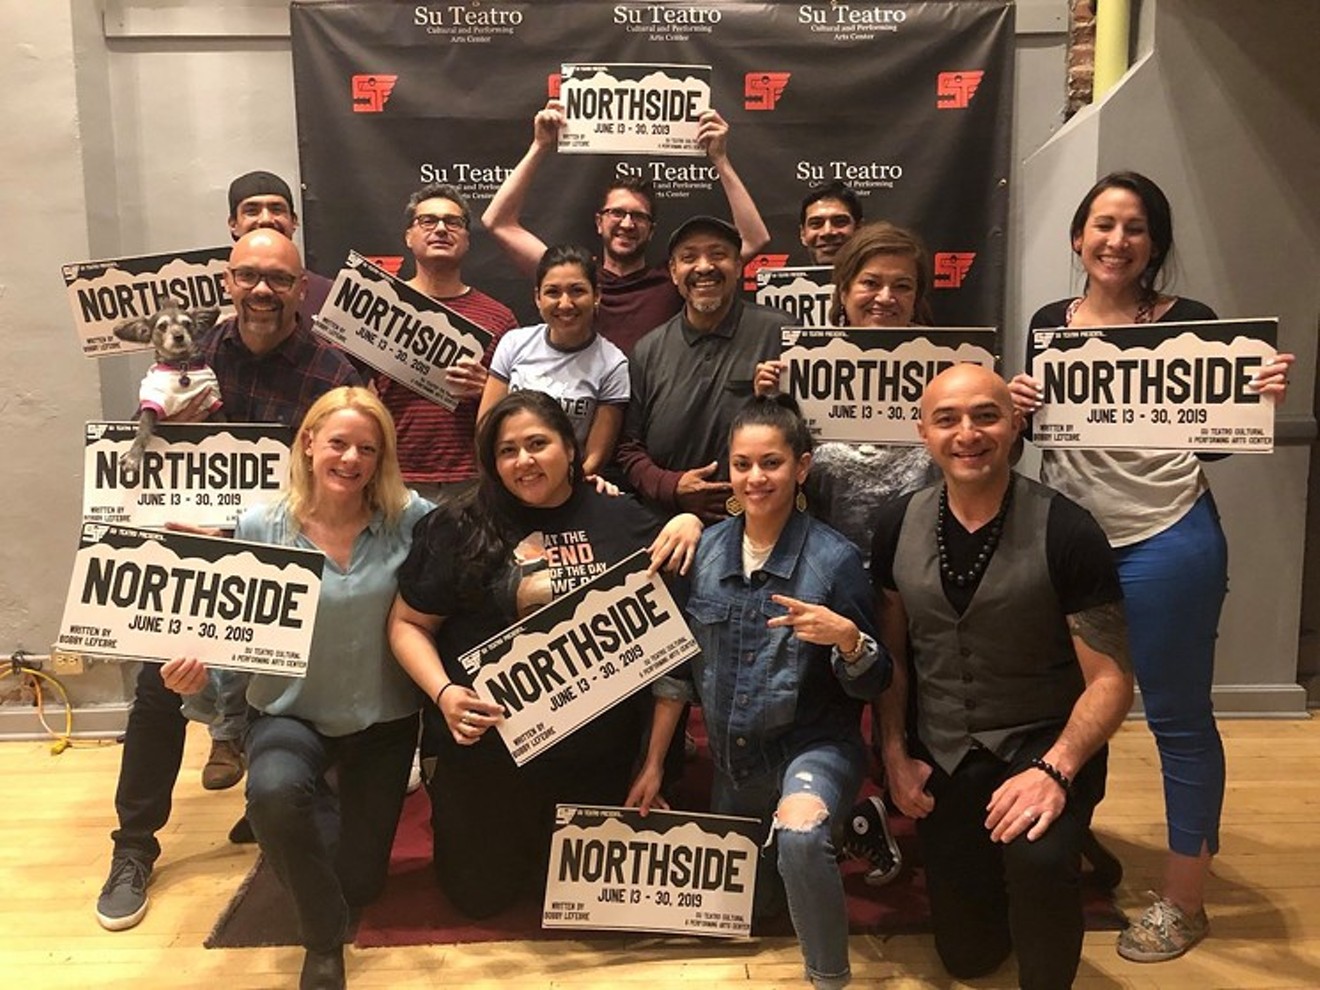 This summer's Northside cast, with Bobby LeFebre in the lower right.